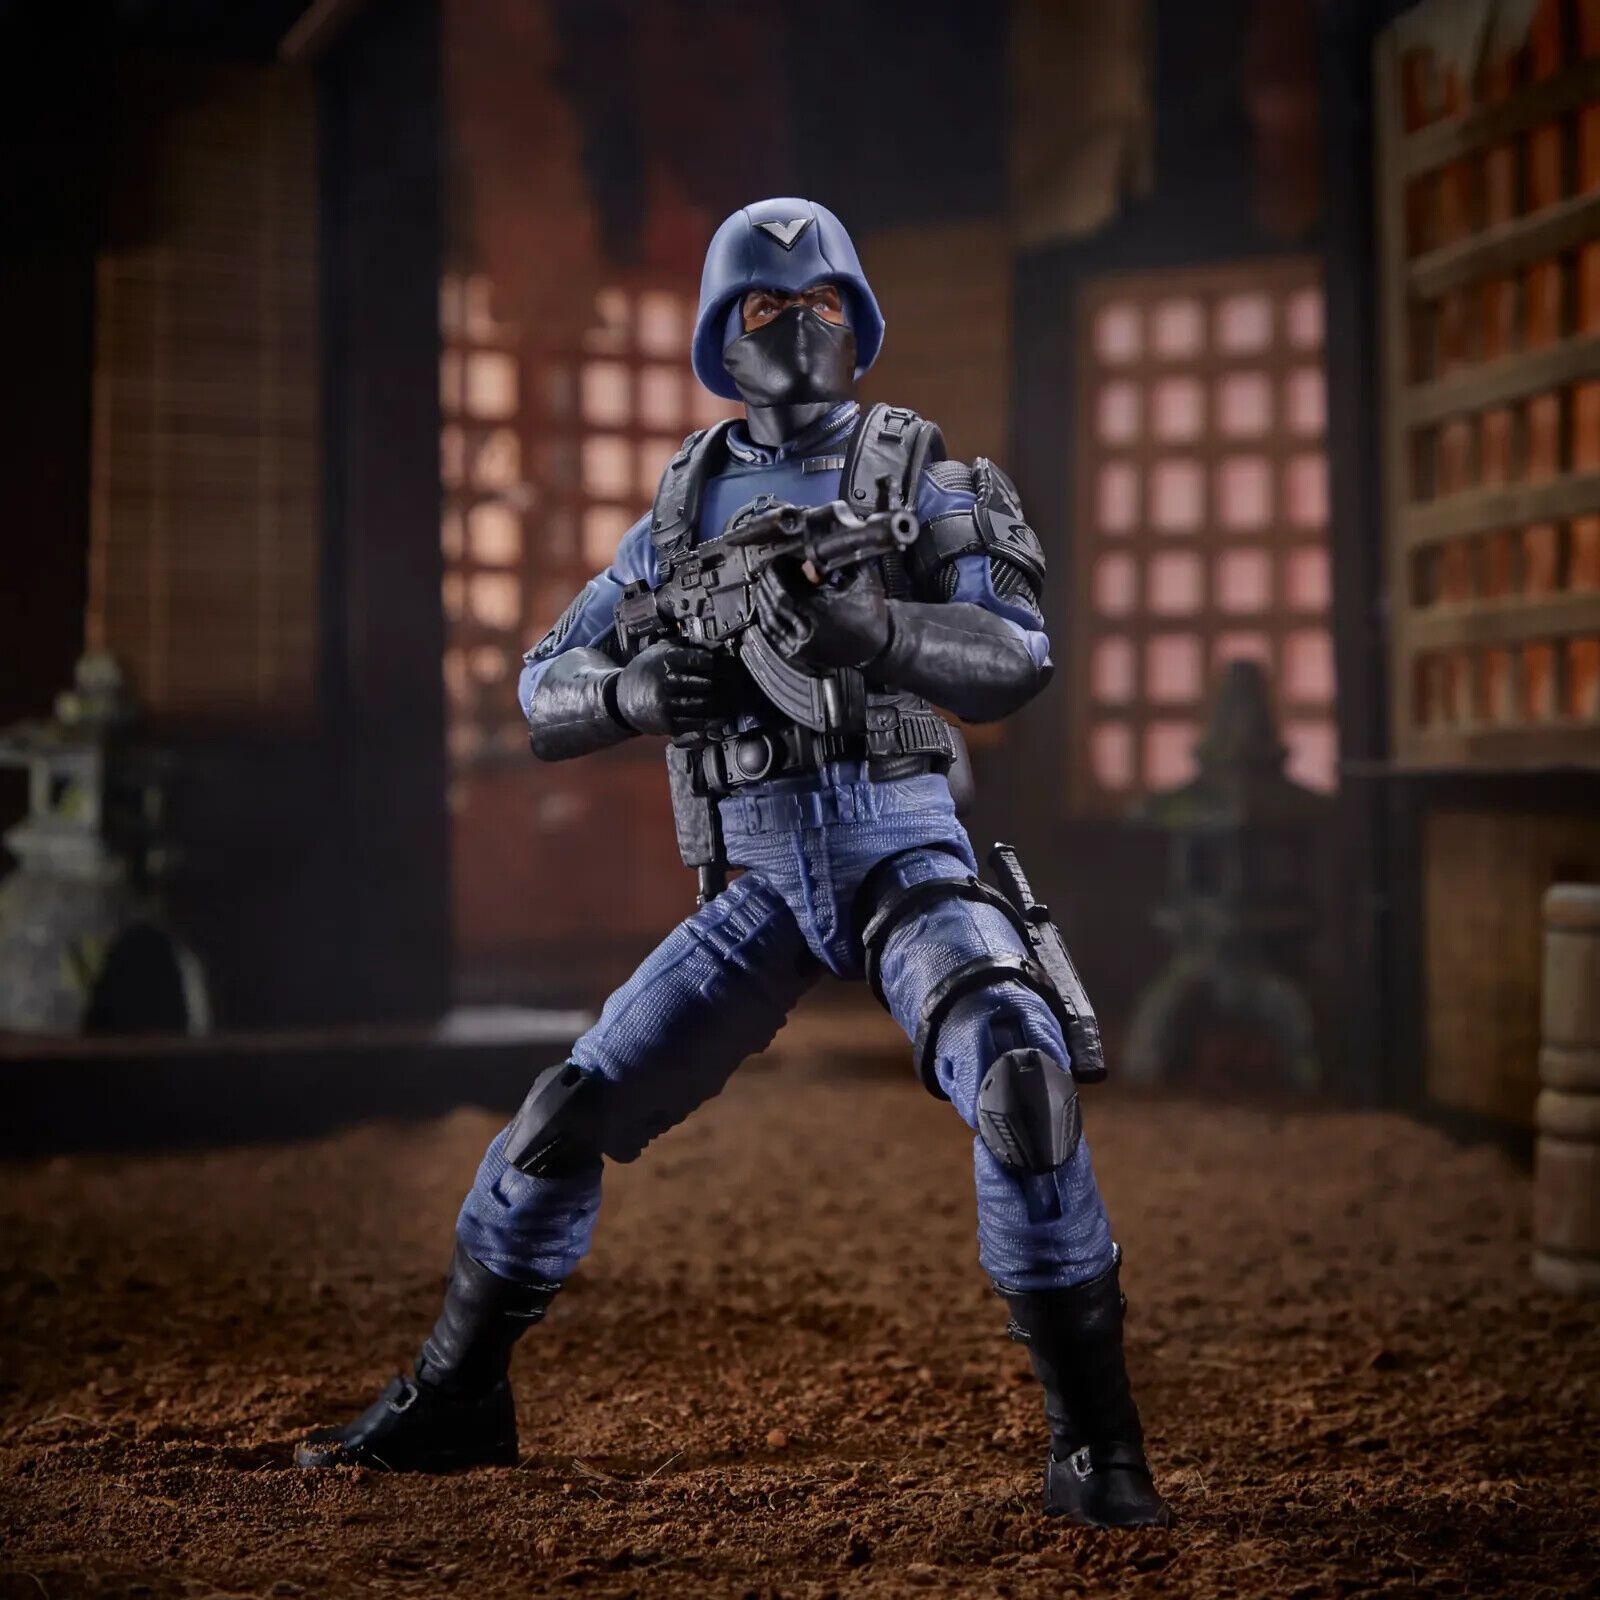 Highly detailed Cobra Officer action figure. Blue and black uniform. Wide stance, machine gun aimed and ready to fire.